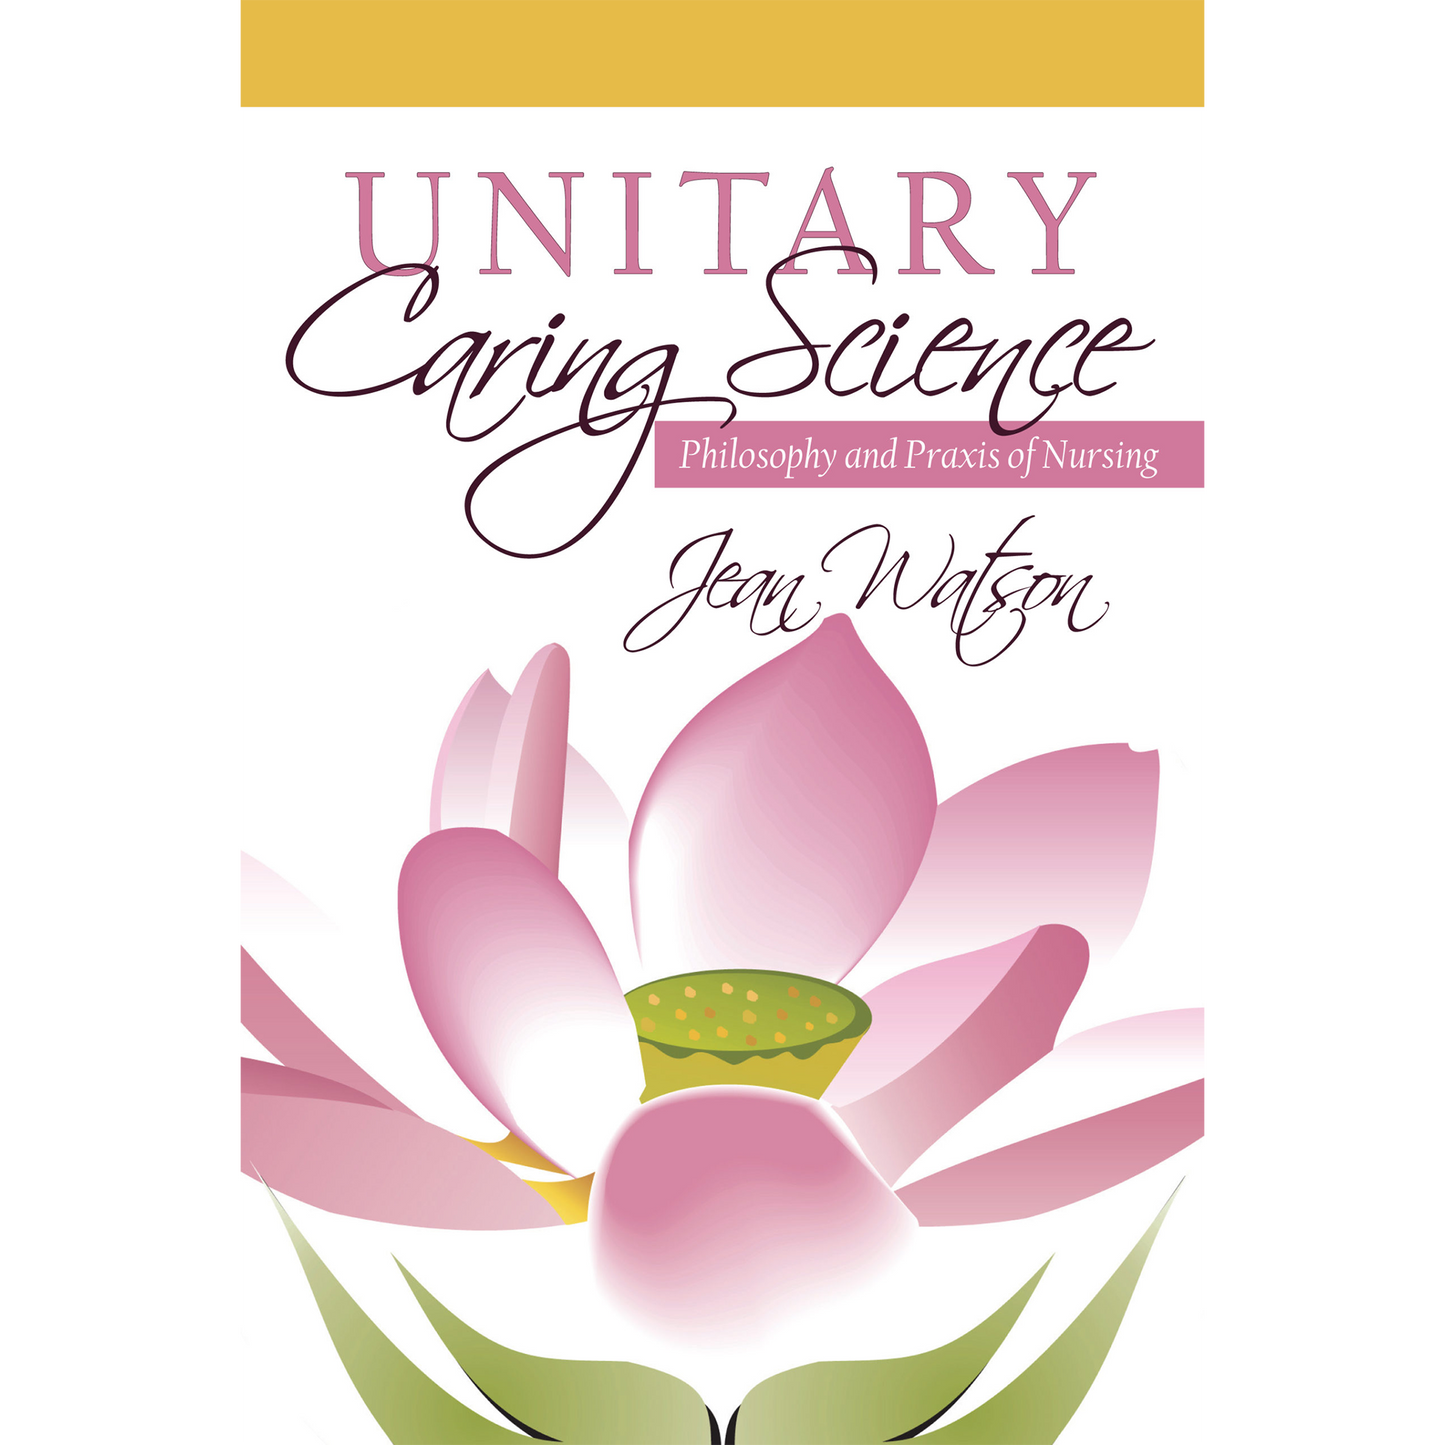 Unitary Caring Science: Philosophy and Praxis of Nursing